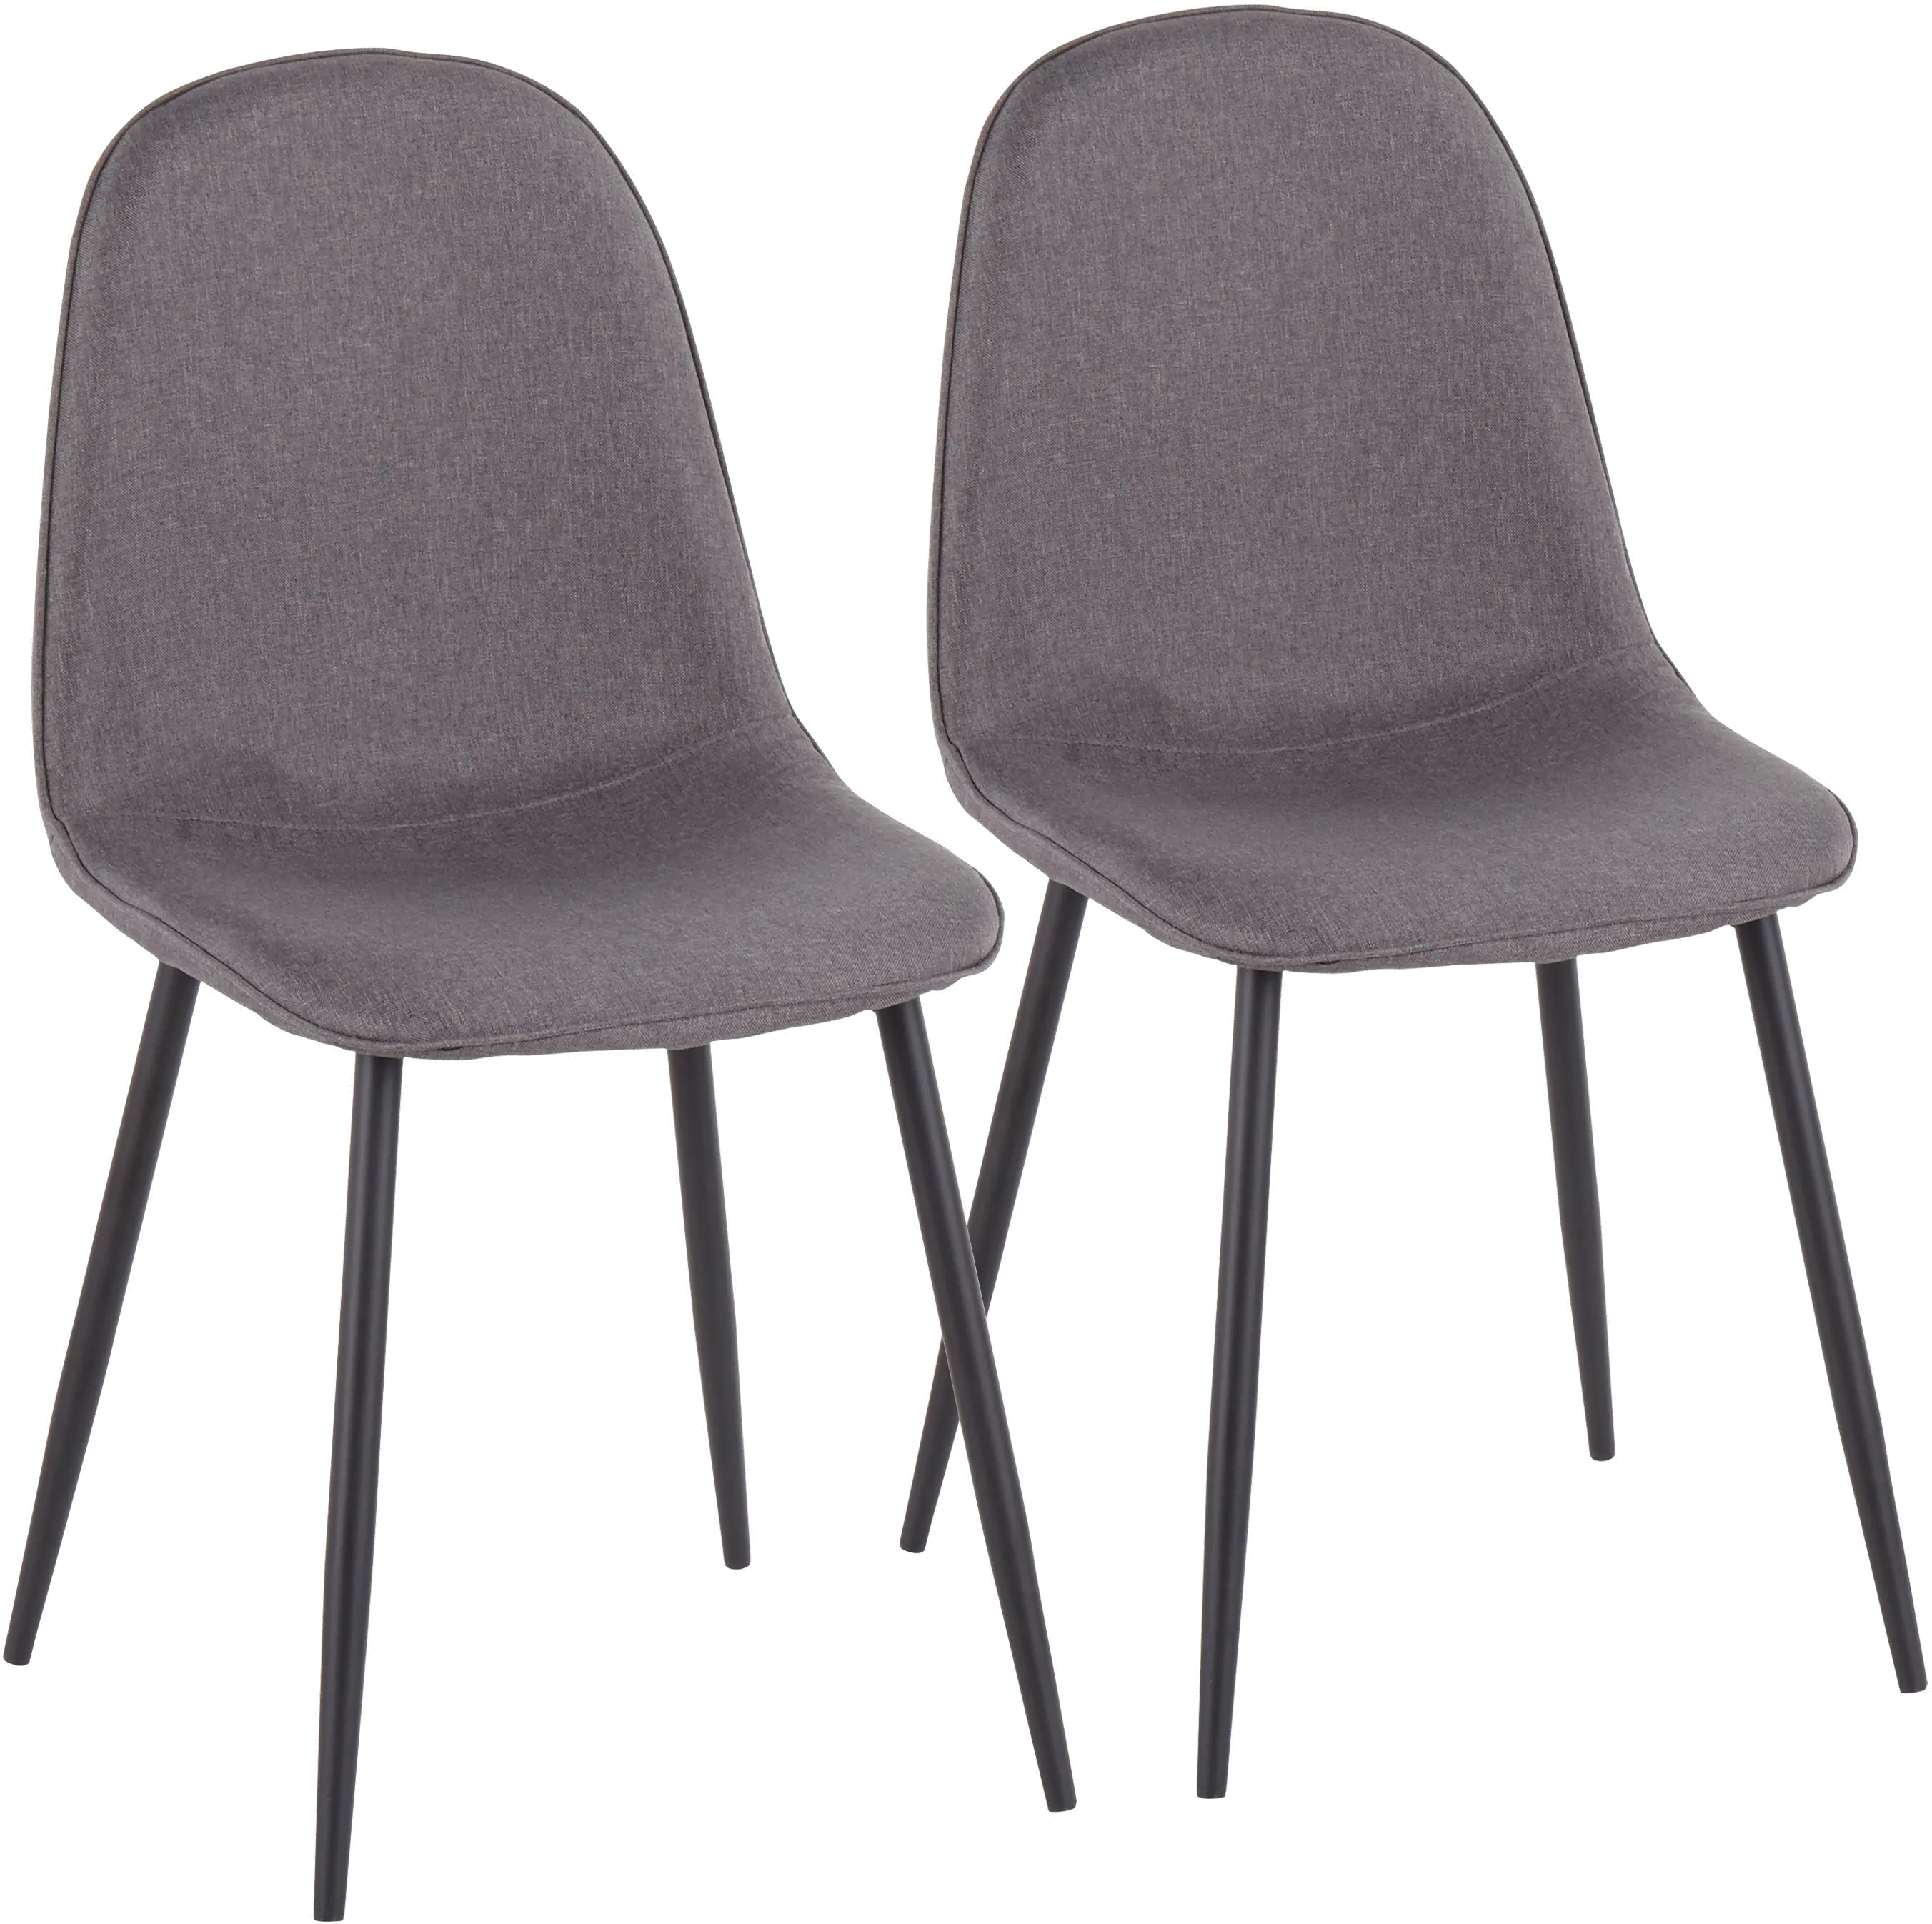 Contemporary Gray and Black Dining Room Chair (Set of 2) - Pebble